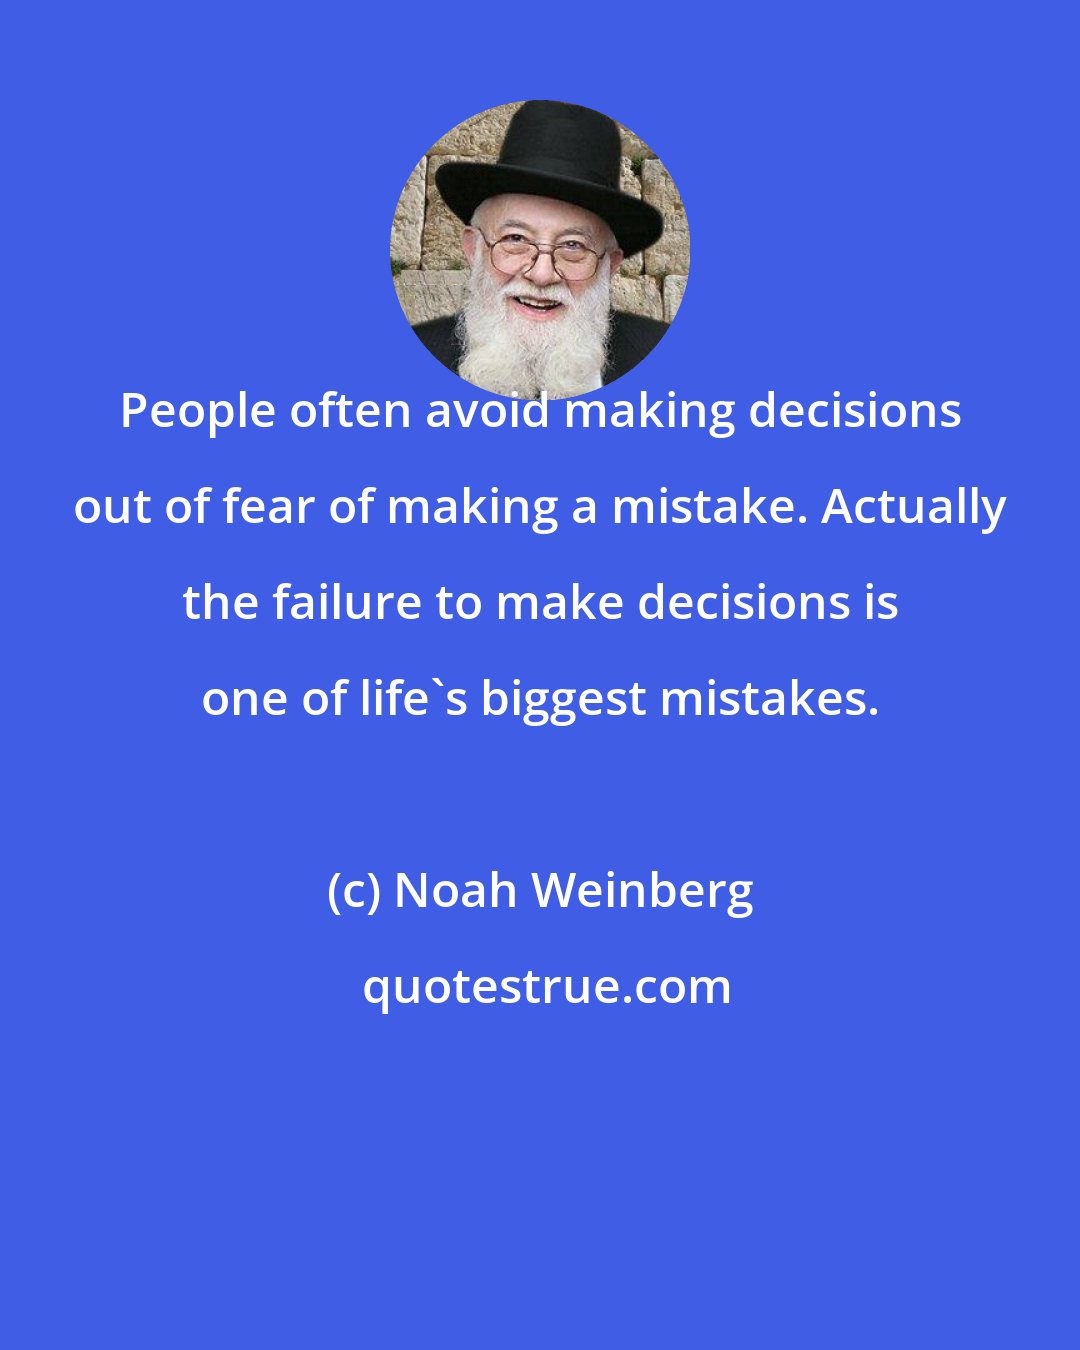 Noah Weinberg: People often avoid making decisions out of fear of making a mistake. Actually the failure to make decisions is one of life's biggest mistakes.